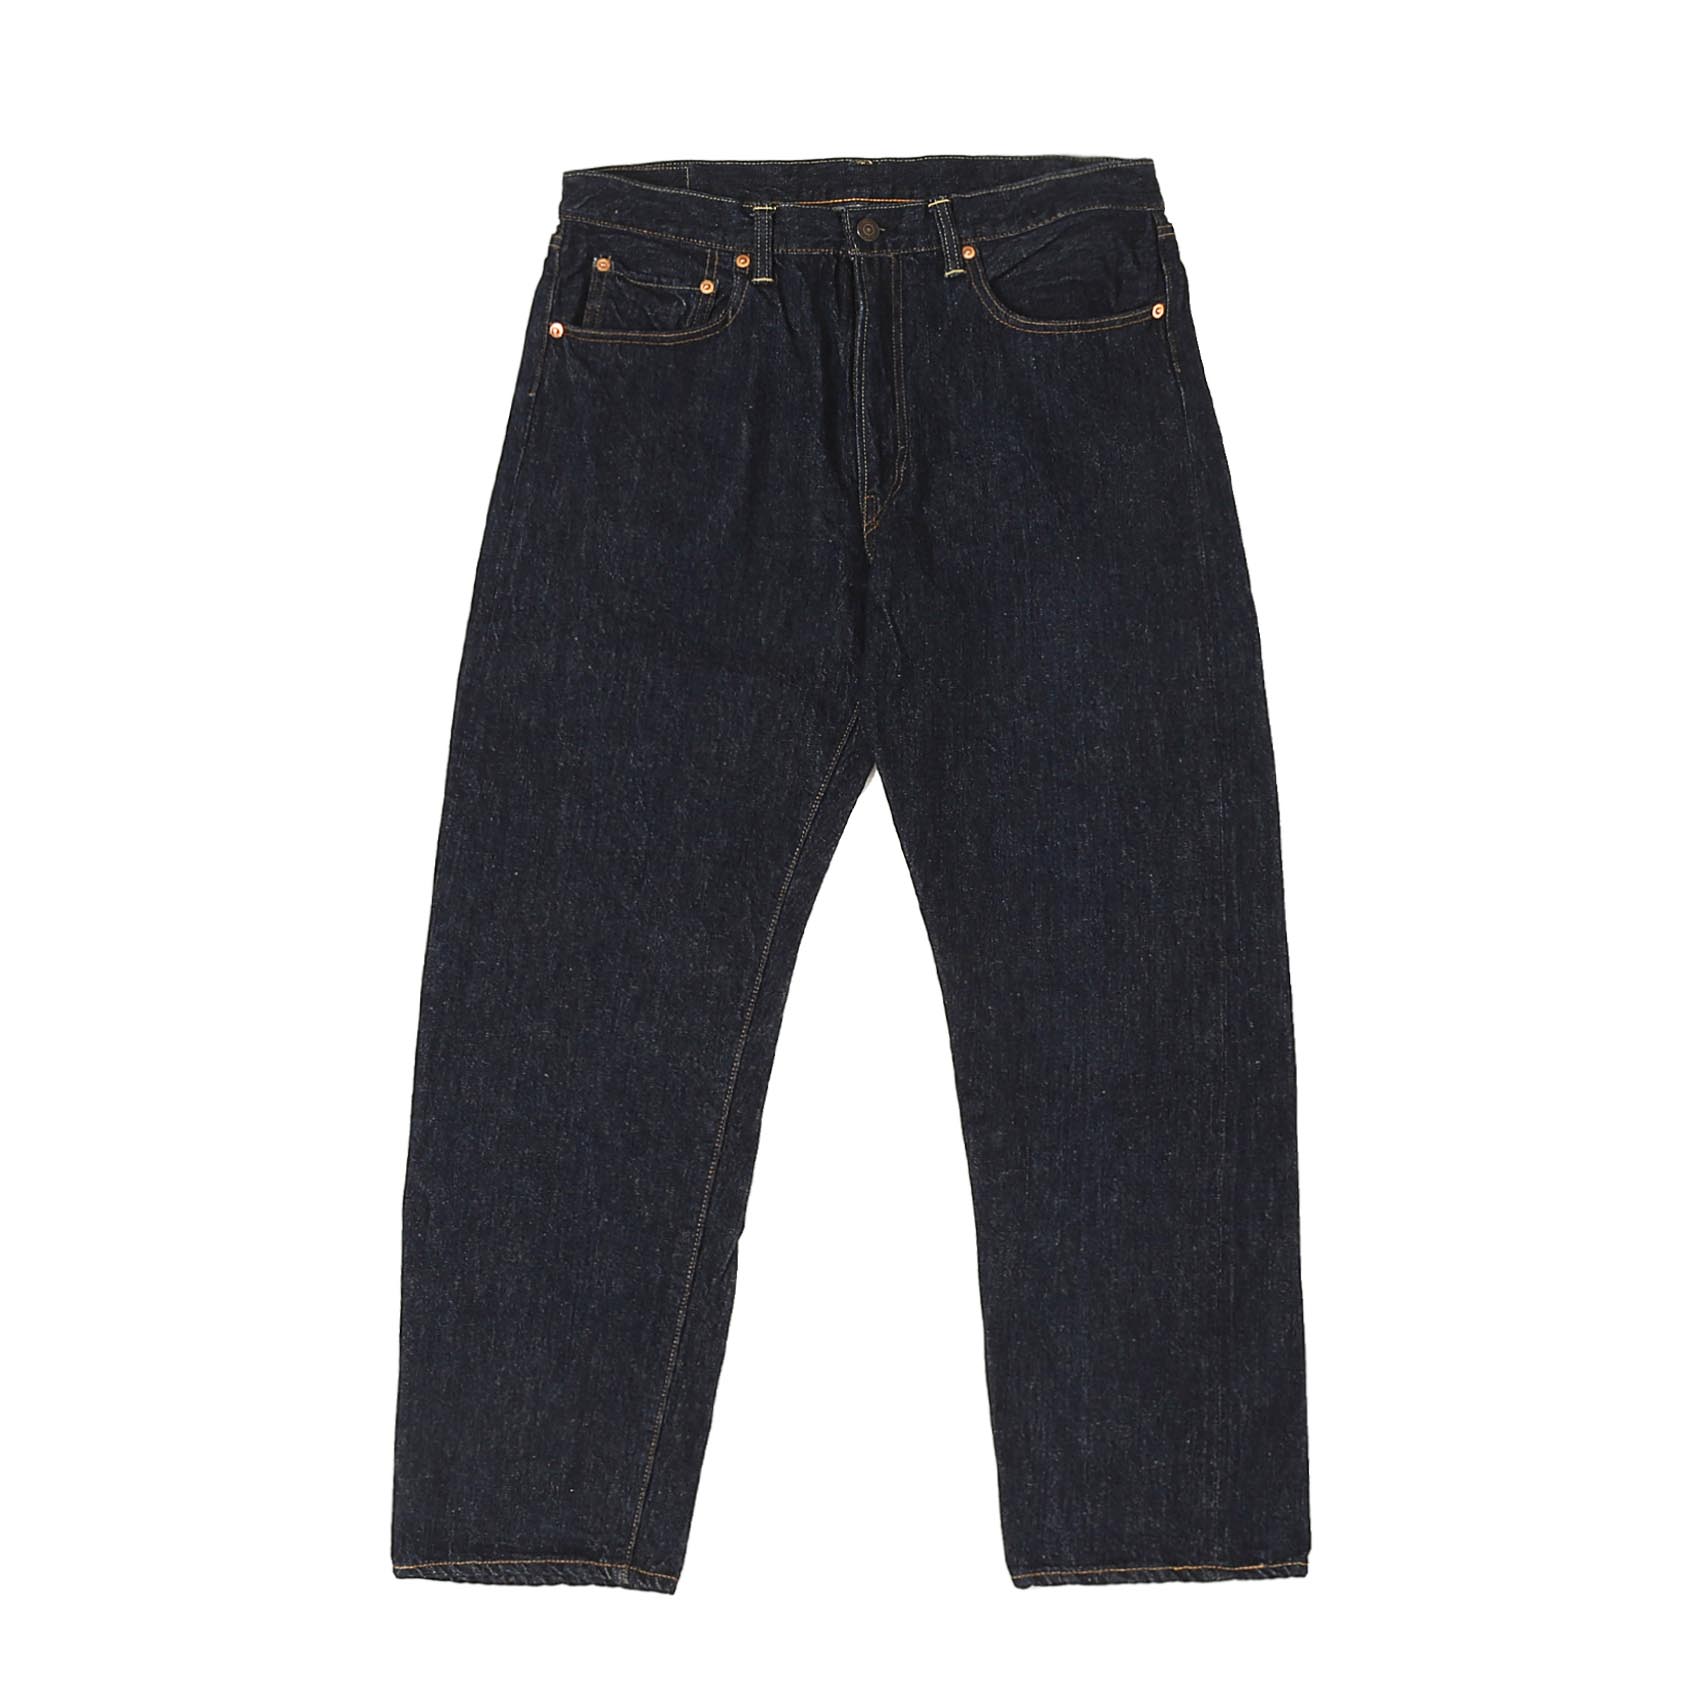 LOT 1105 2ND-HAND SELVAGE DENIM - ONE WASHED